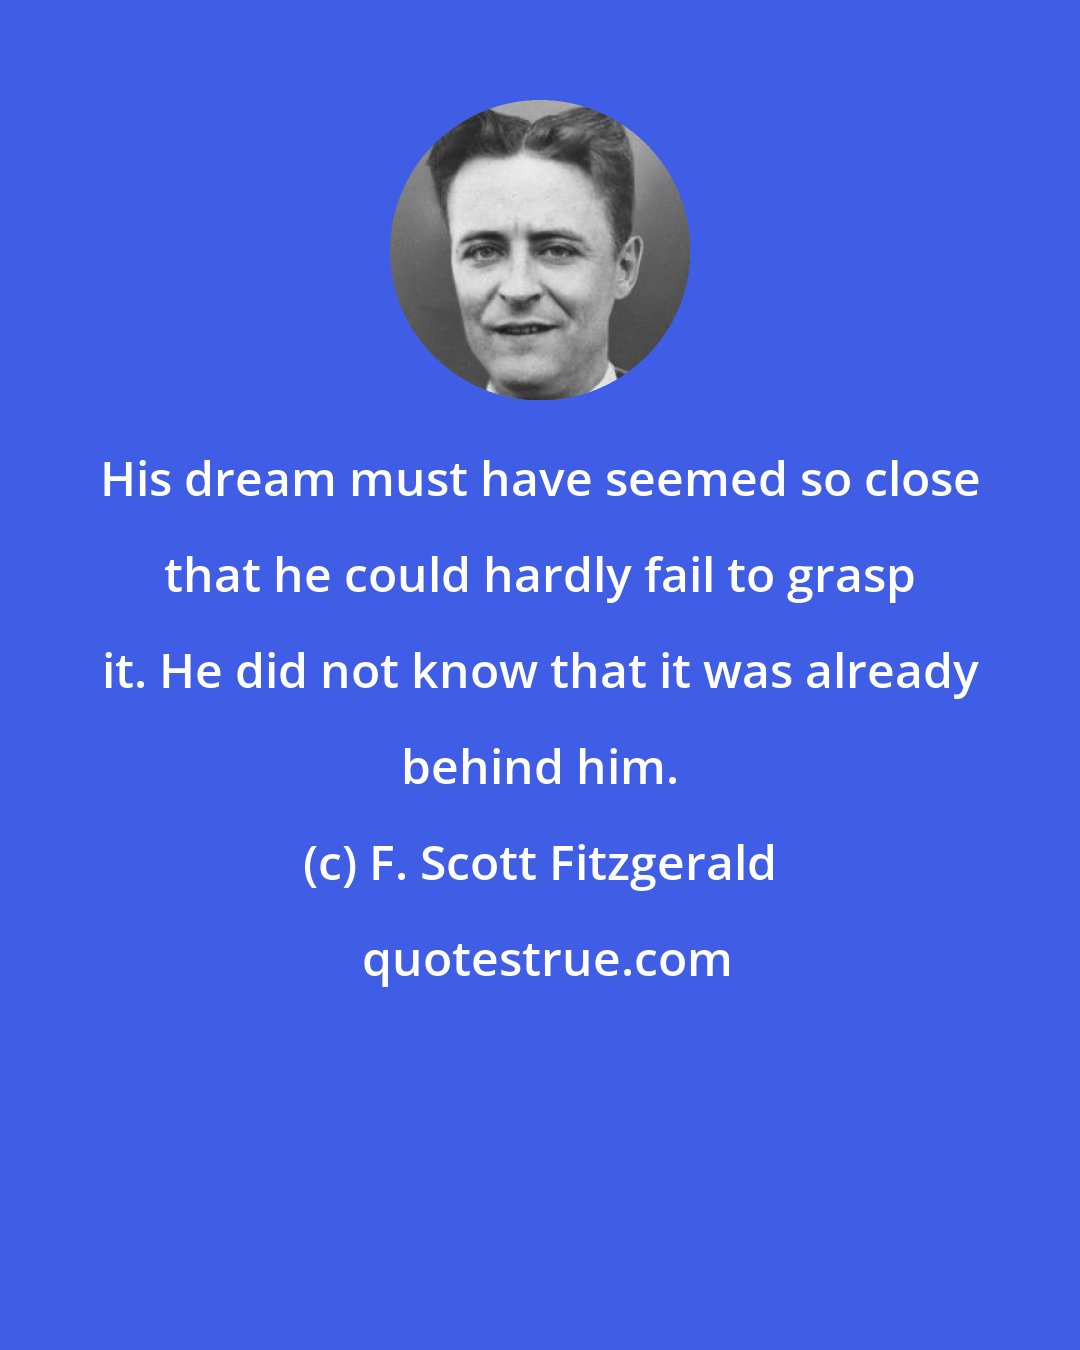 F. Scott Fitzgerald: His dream must have seemed so close that he could hardly fail to grasp it. He did not know that it was already behind him.